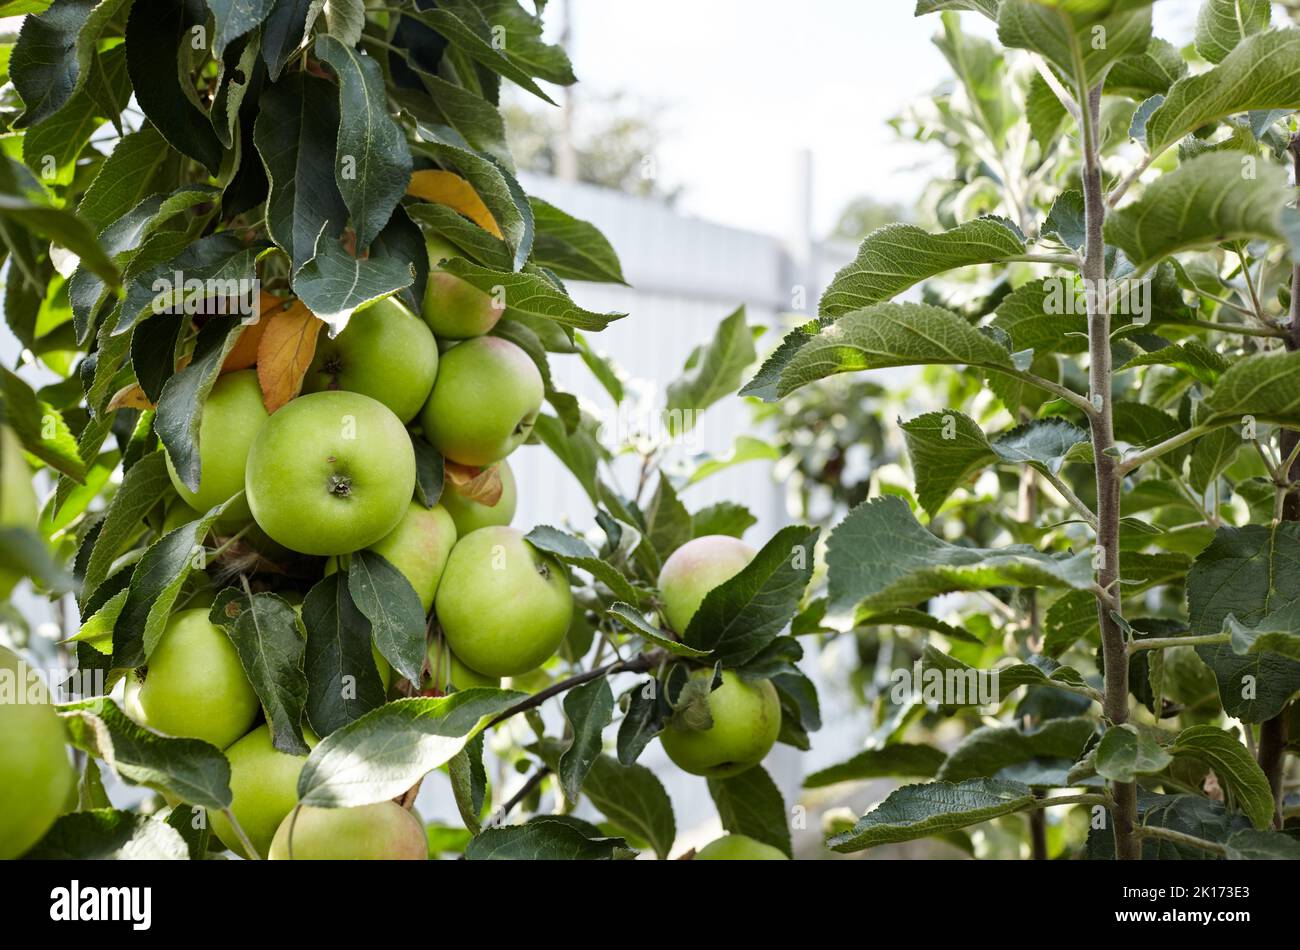 Ripe apples on a tree in a garden. Organic apples hanging from a tree branch in an apple orchard Stock Photo